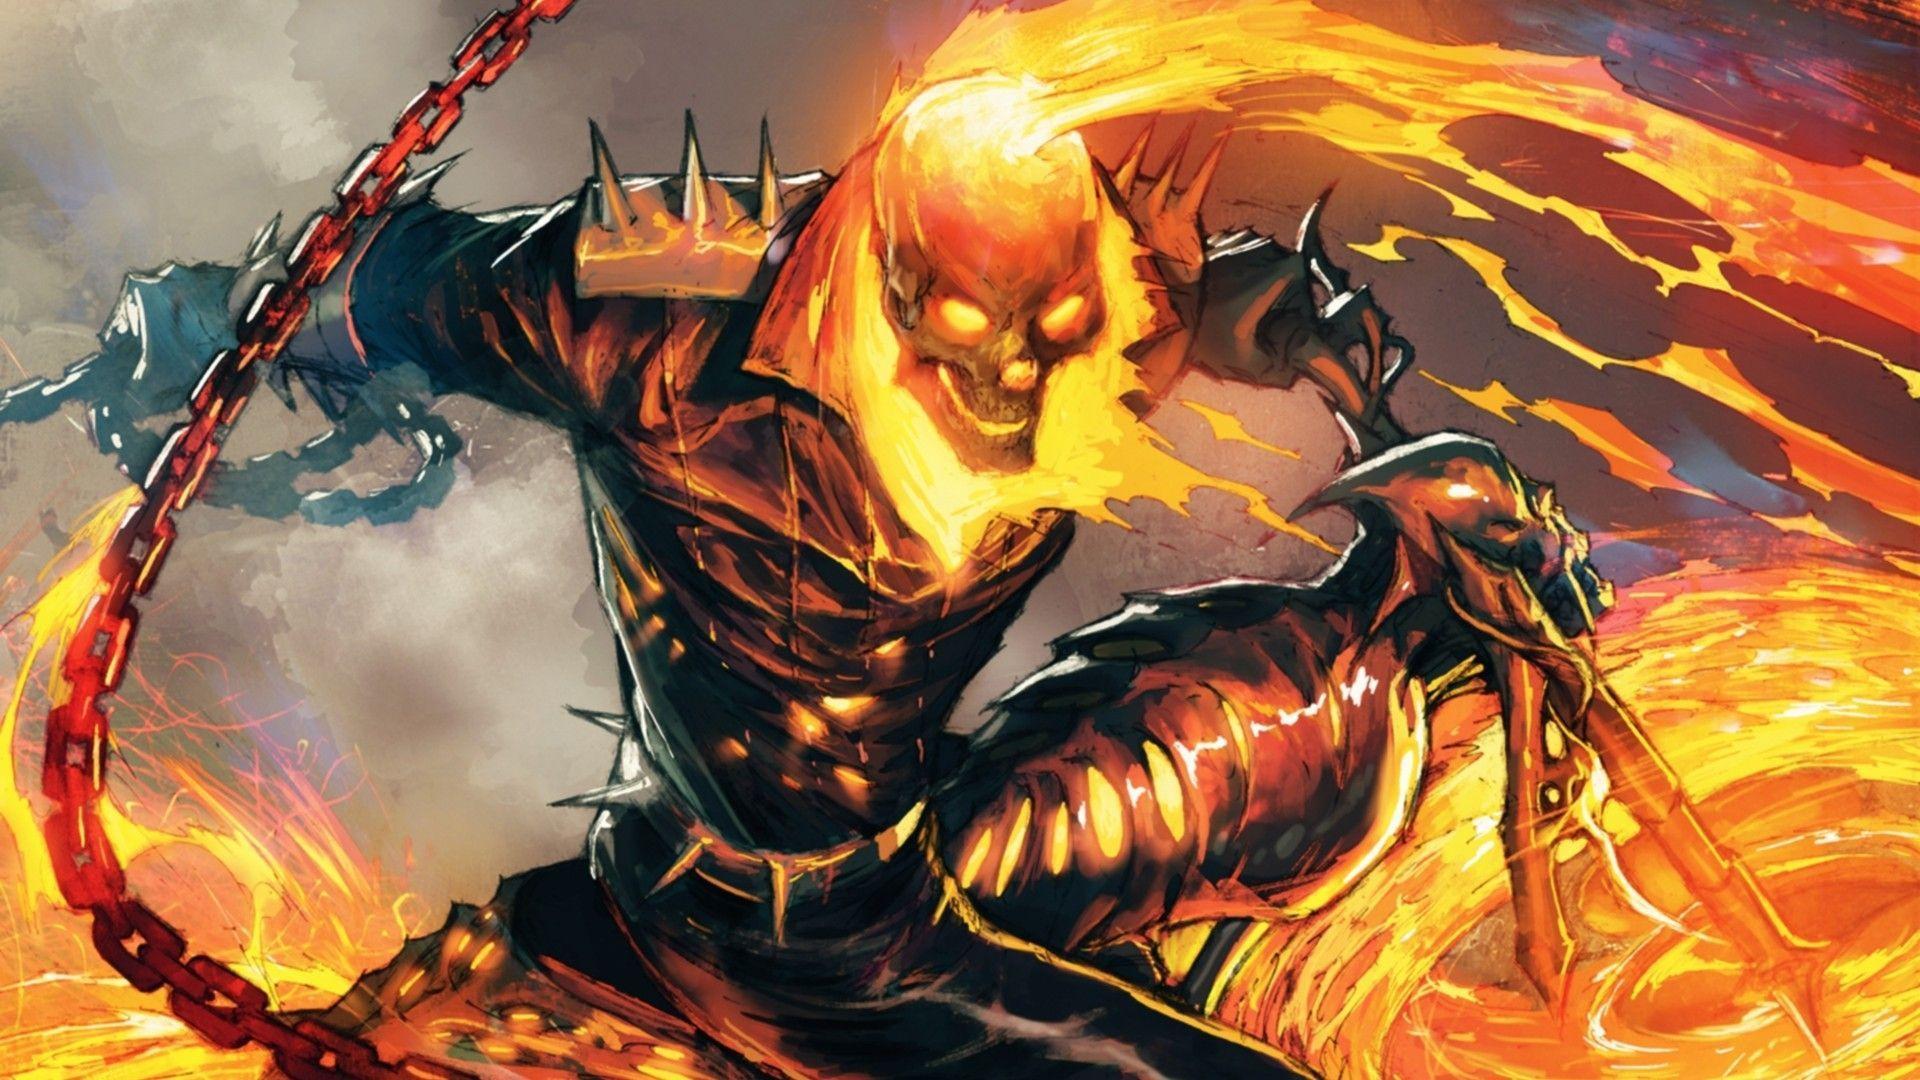 Ghost Rider Will Join The MCU. The Nerd Stash